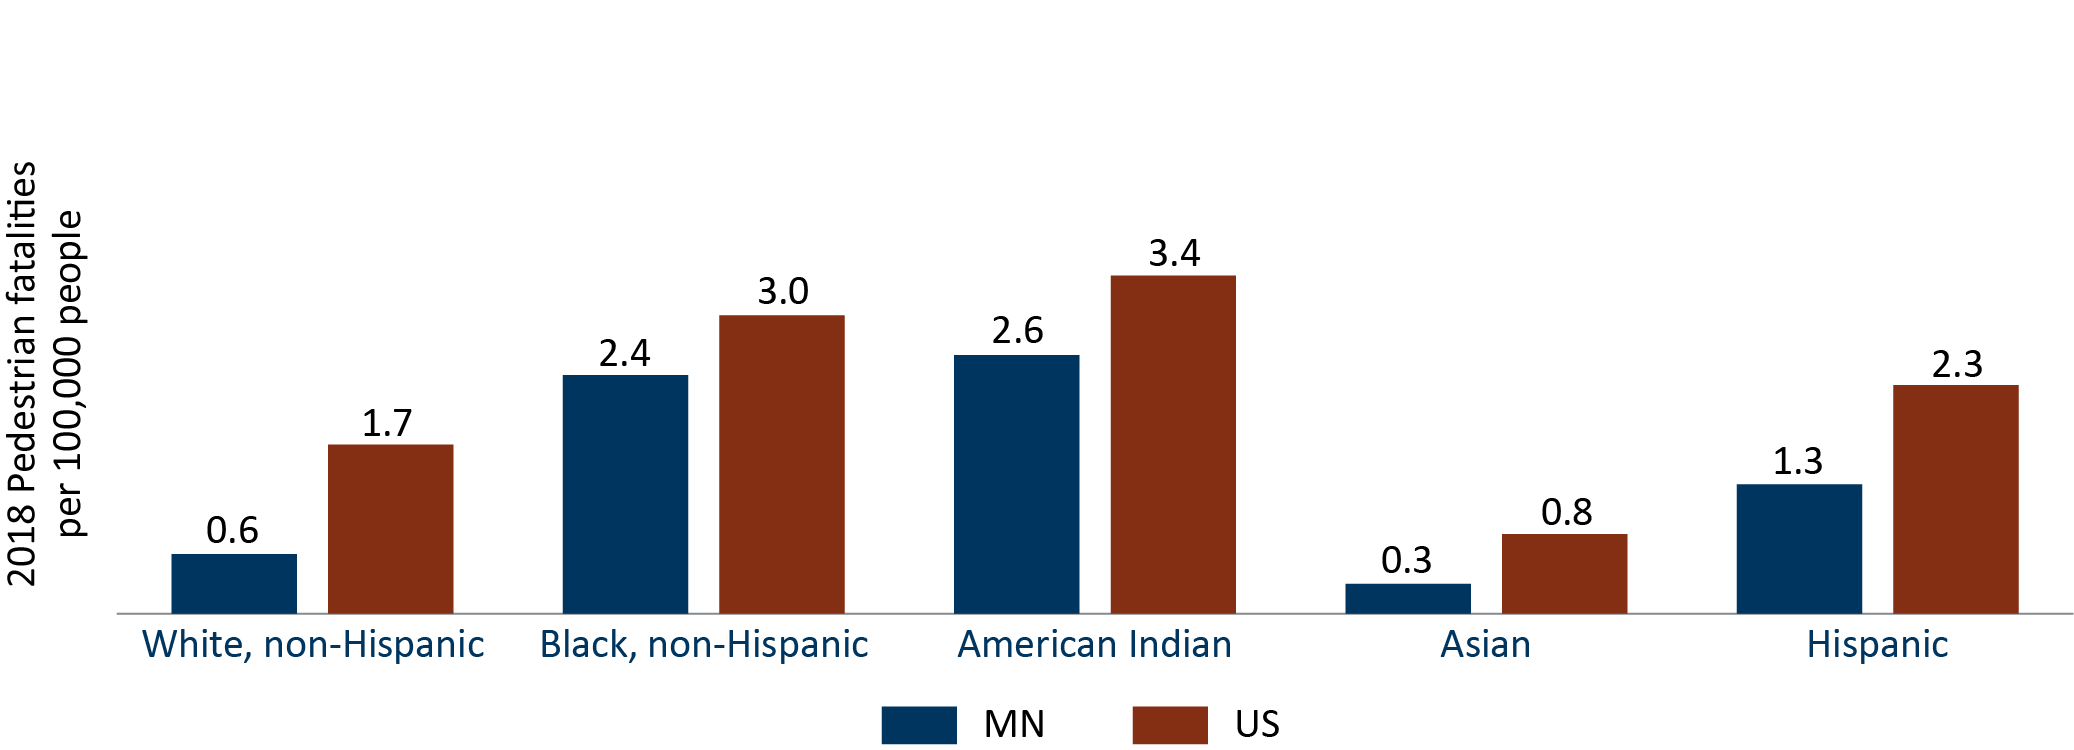 Chart shows pedestrian death rates by race and ethnicity in 2018 for both Minnesota and United States. American Indians had the highest pedestrian death rate per 100,000 people in both Minnesota and the United States. American Indians had 2.6 pedestrian deaths per 100,000 people in Minnesota and 3.4 pedestrian deaths per 100,000 people in the United States. Black people had the second highest rate of pedestrian deaths, with 2.4 pedestrian deaths per 100,000 people in Minnesota and 3.0 pedestrian deaths per 100,000 people in the United States.